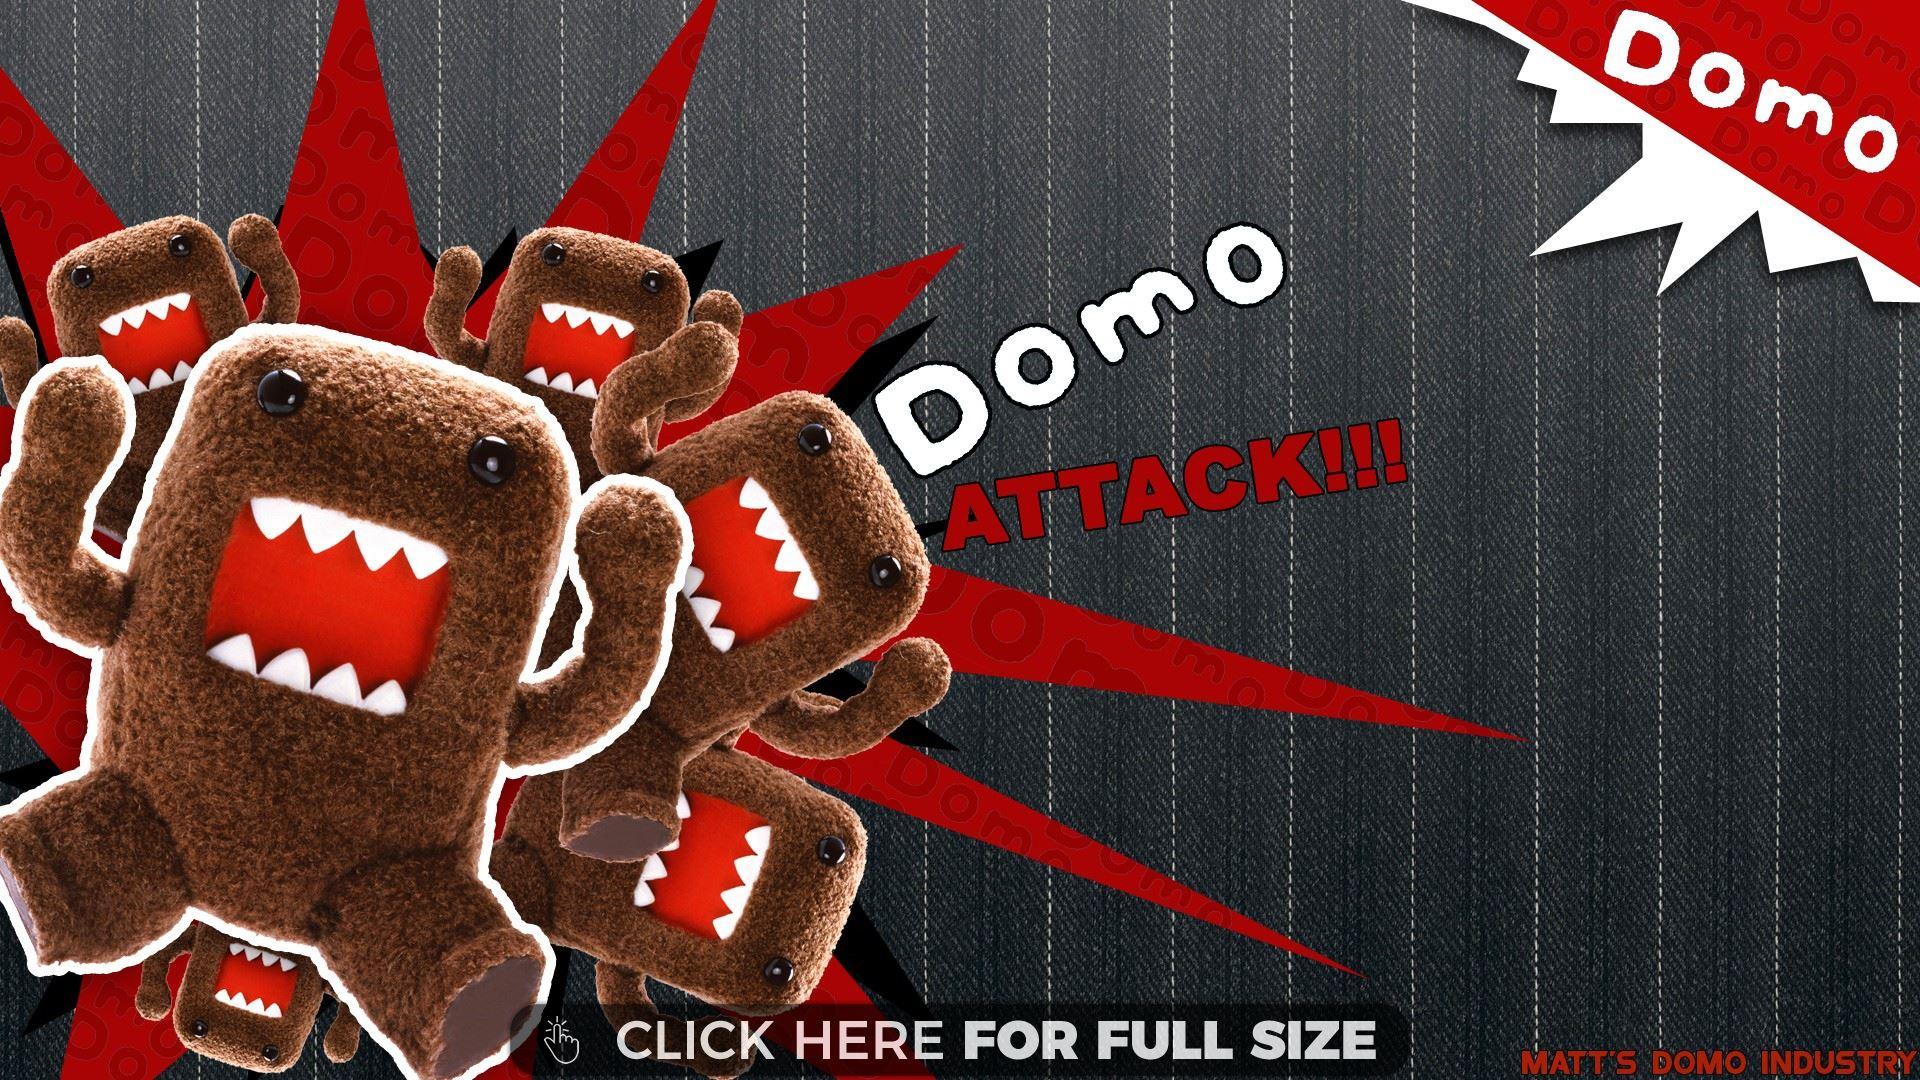 domo wallpaper, photo and desktop background up to 8K 7680x4320